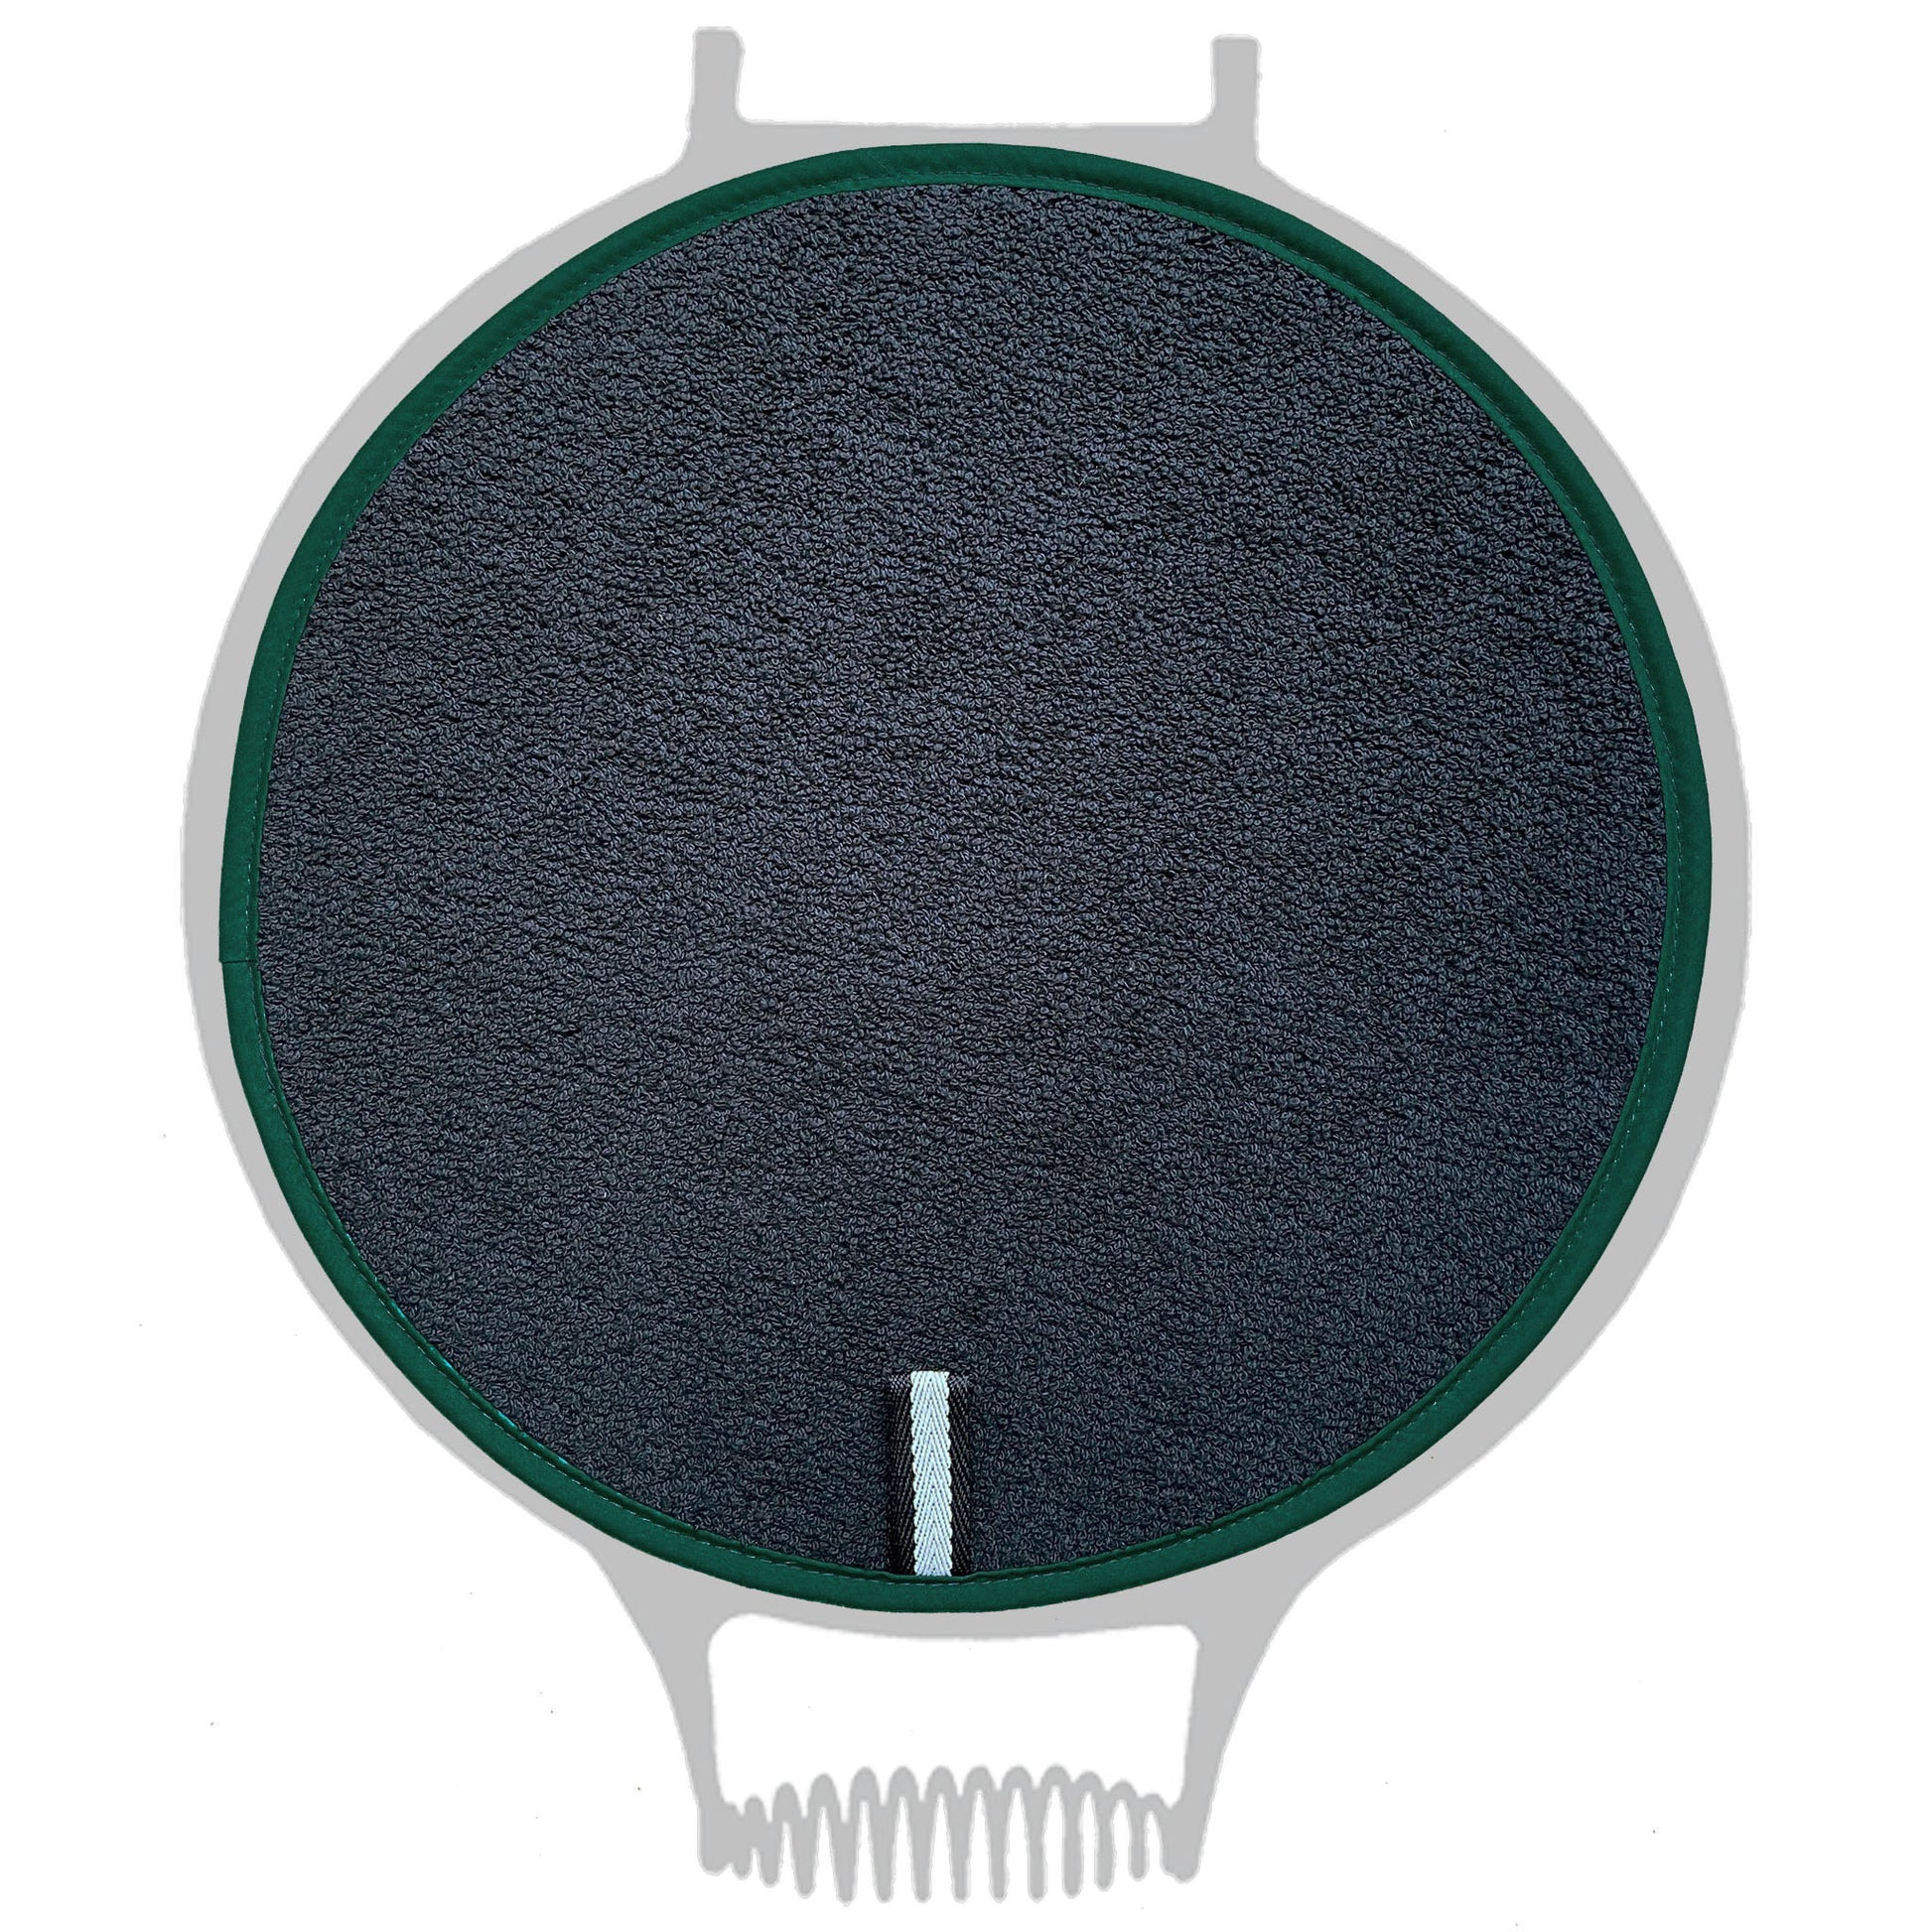 Chef Pad - Aga - The Chef Pad Shop - Insulate Range: All Black Towelling Chefs Pad with Green Binding For Use With Aga Cookers